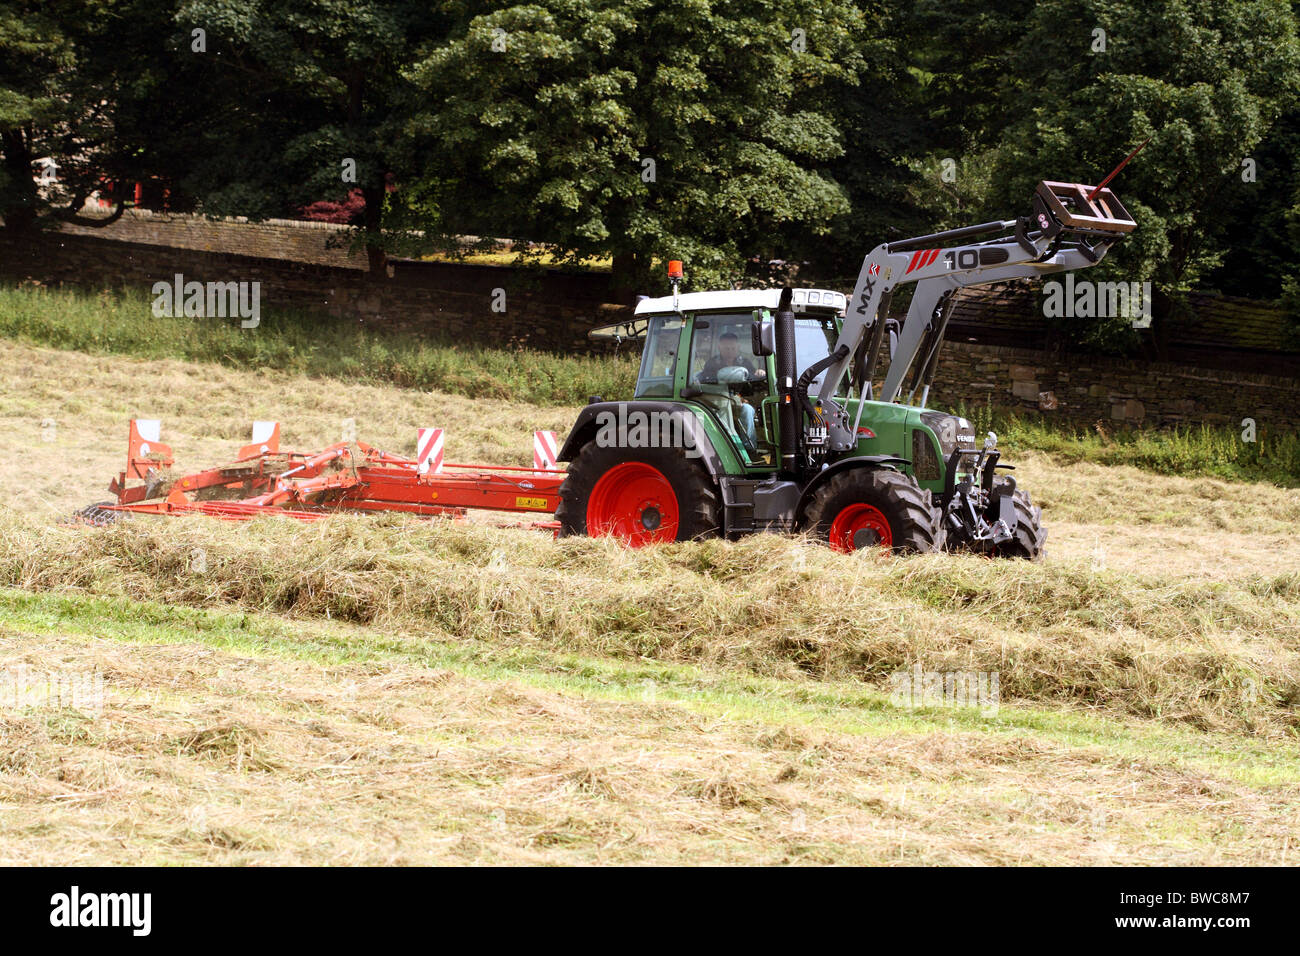 Harvest Time in a Hay Meadow near Shelf Yorkshire showing a tractor furrowing hay Stock Photo